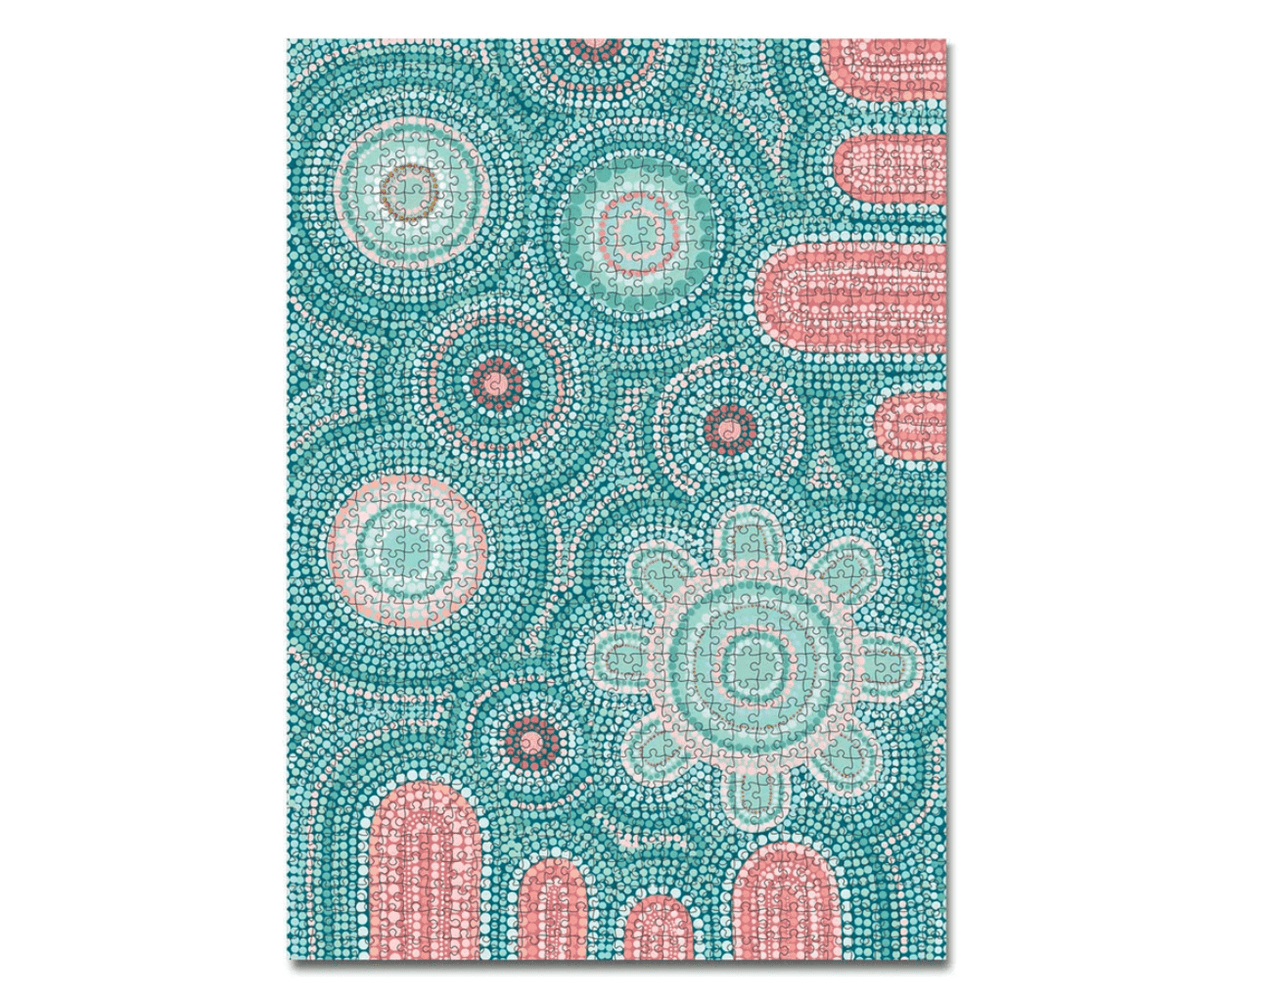 A teal and pink 1000 Piece Puzzle - Giwaa-Yubaa with an aboriginal design on it, by Journey of Something.